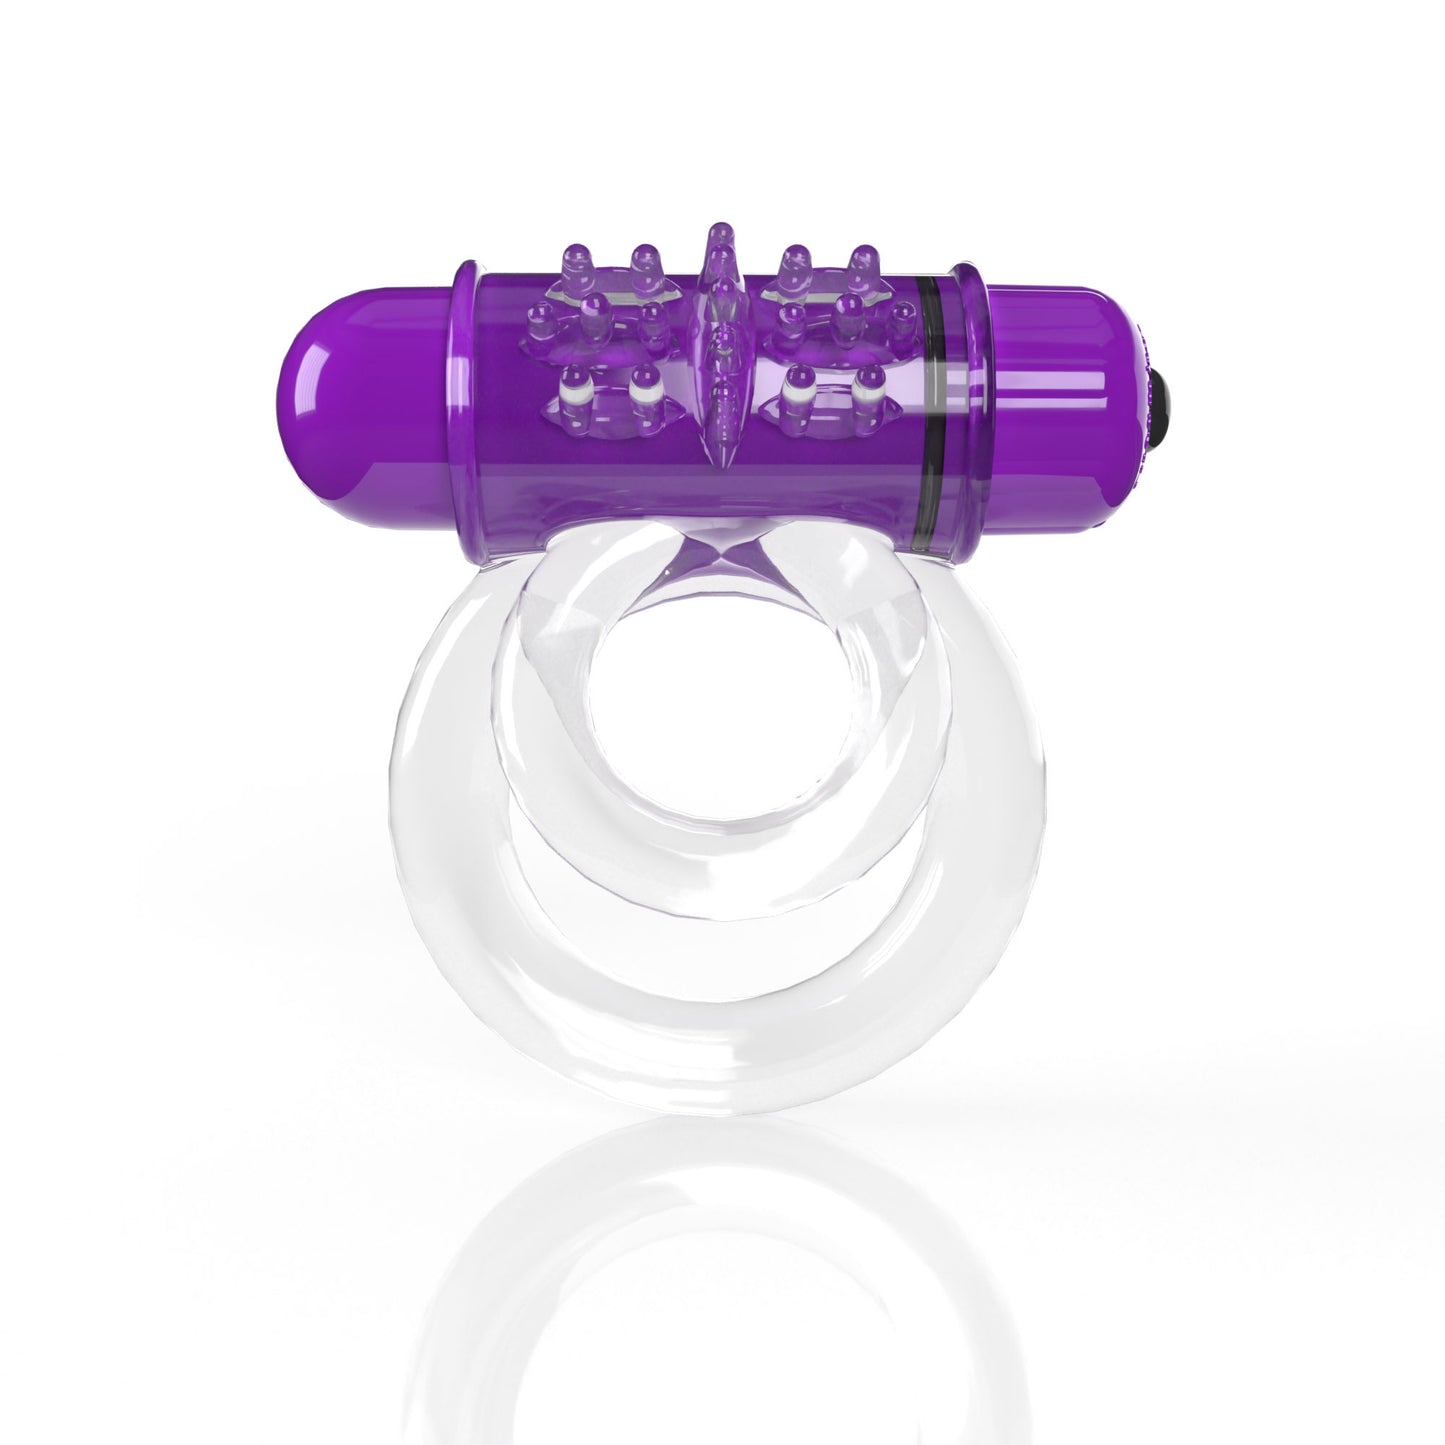 Screaming O 4b - Double O Super Powered Vibrating  Double Ring - Collection